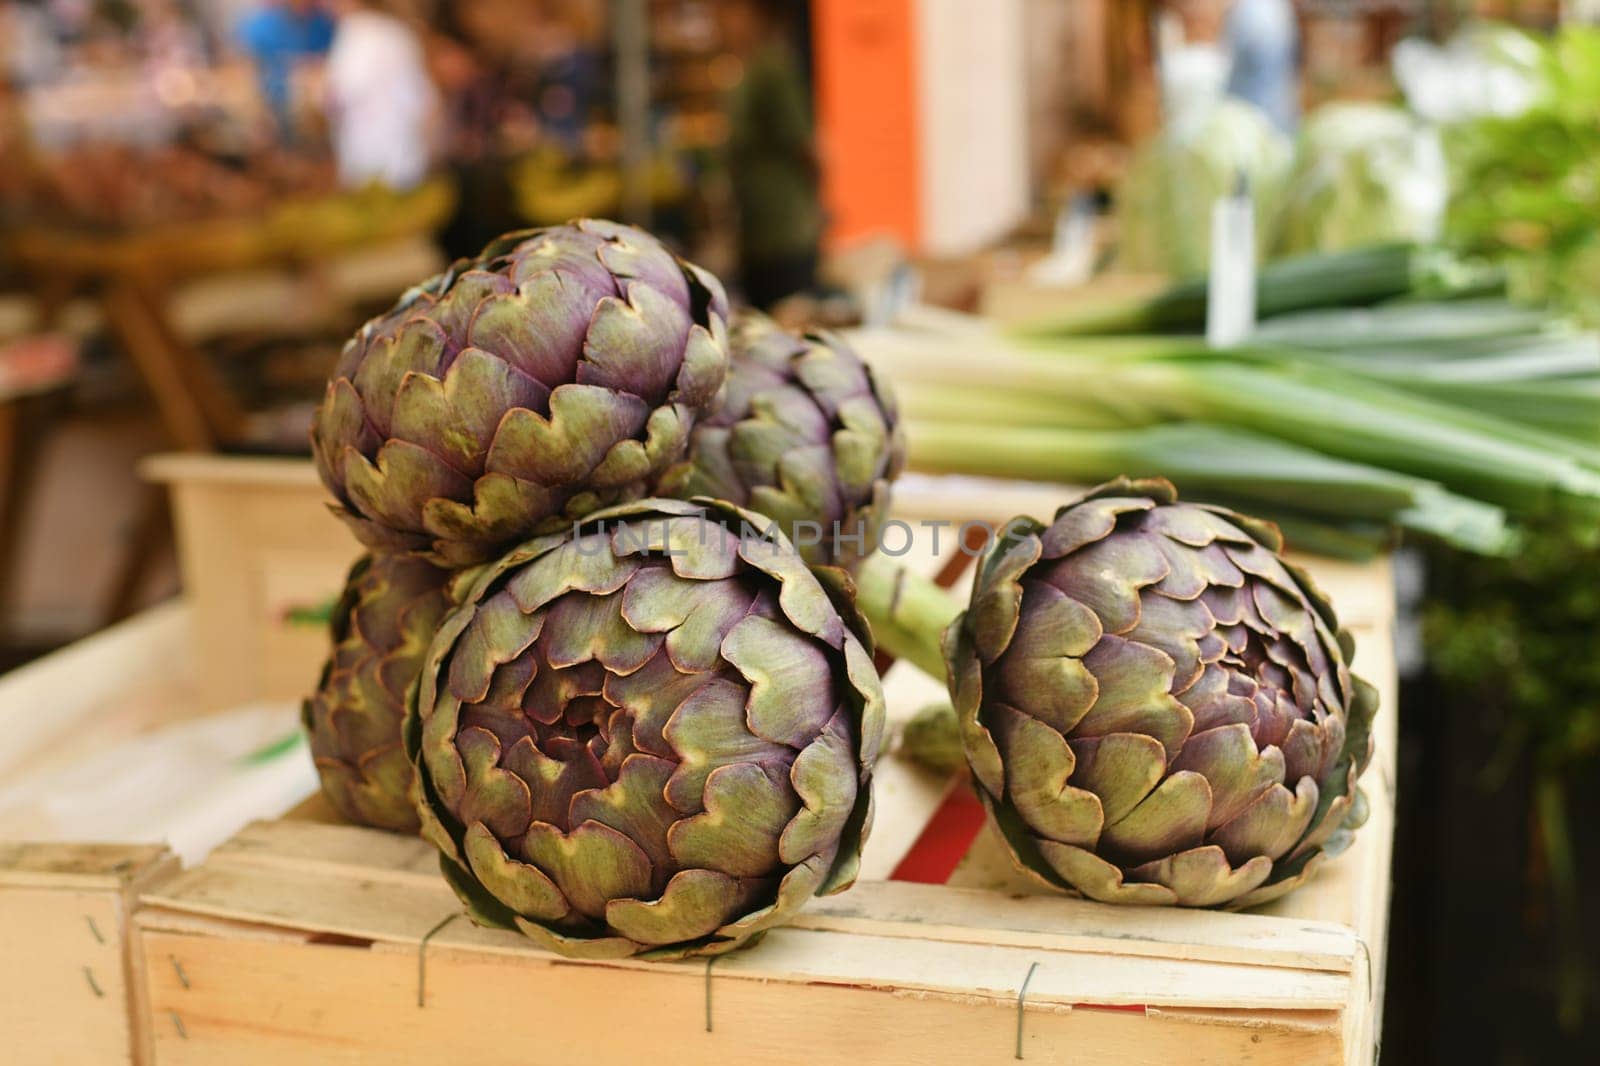 The artichokes for sale in a french market